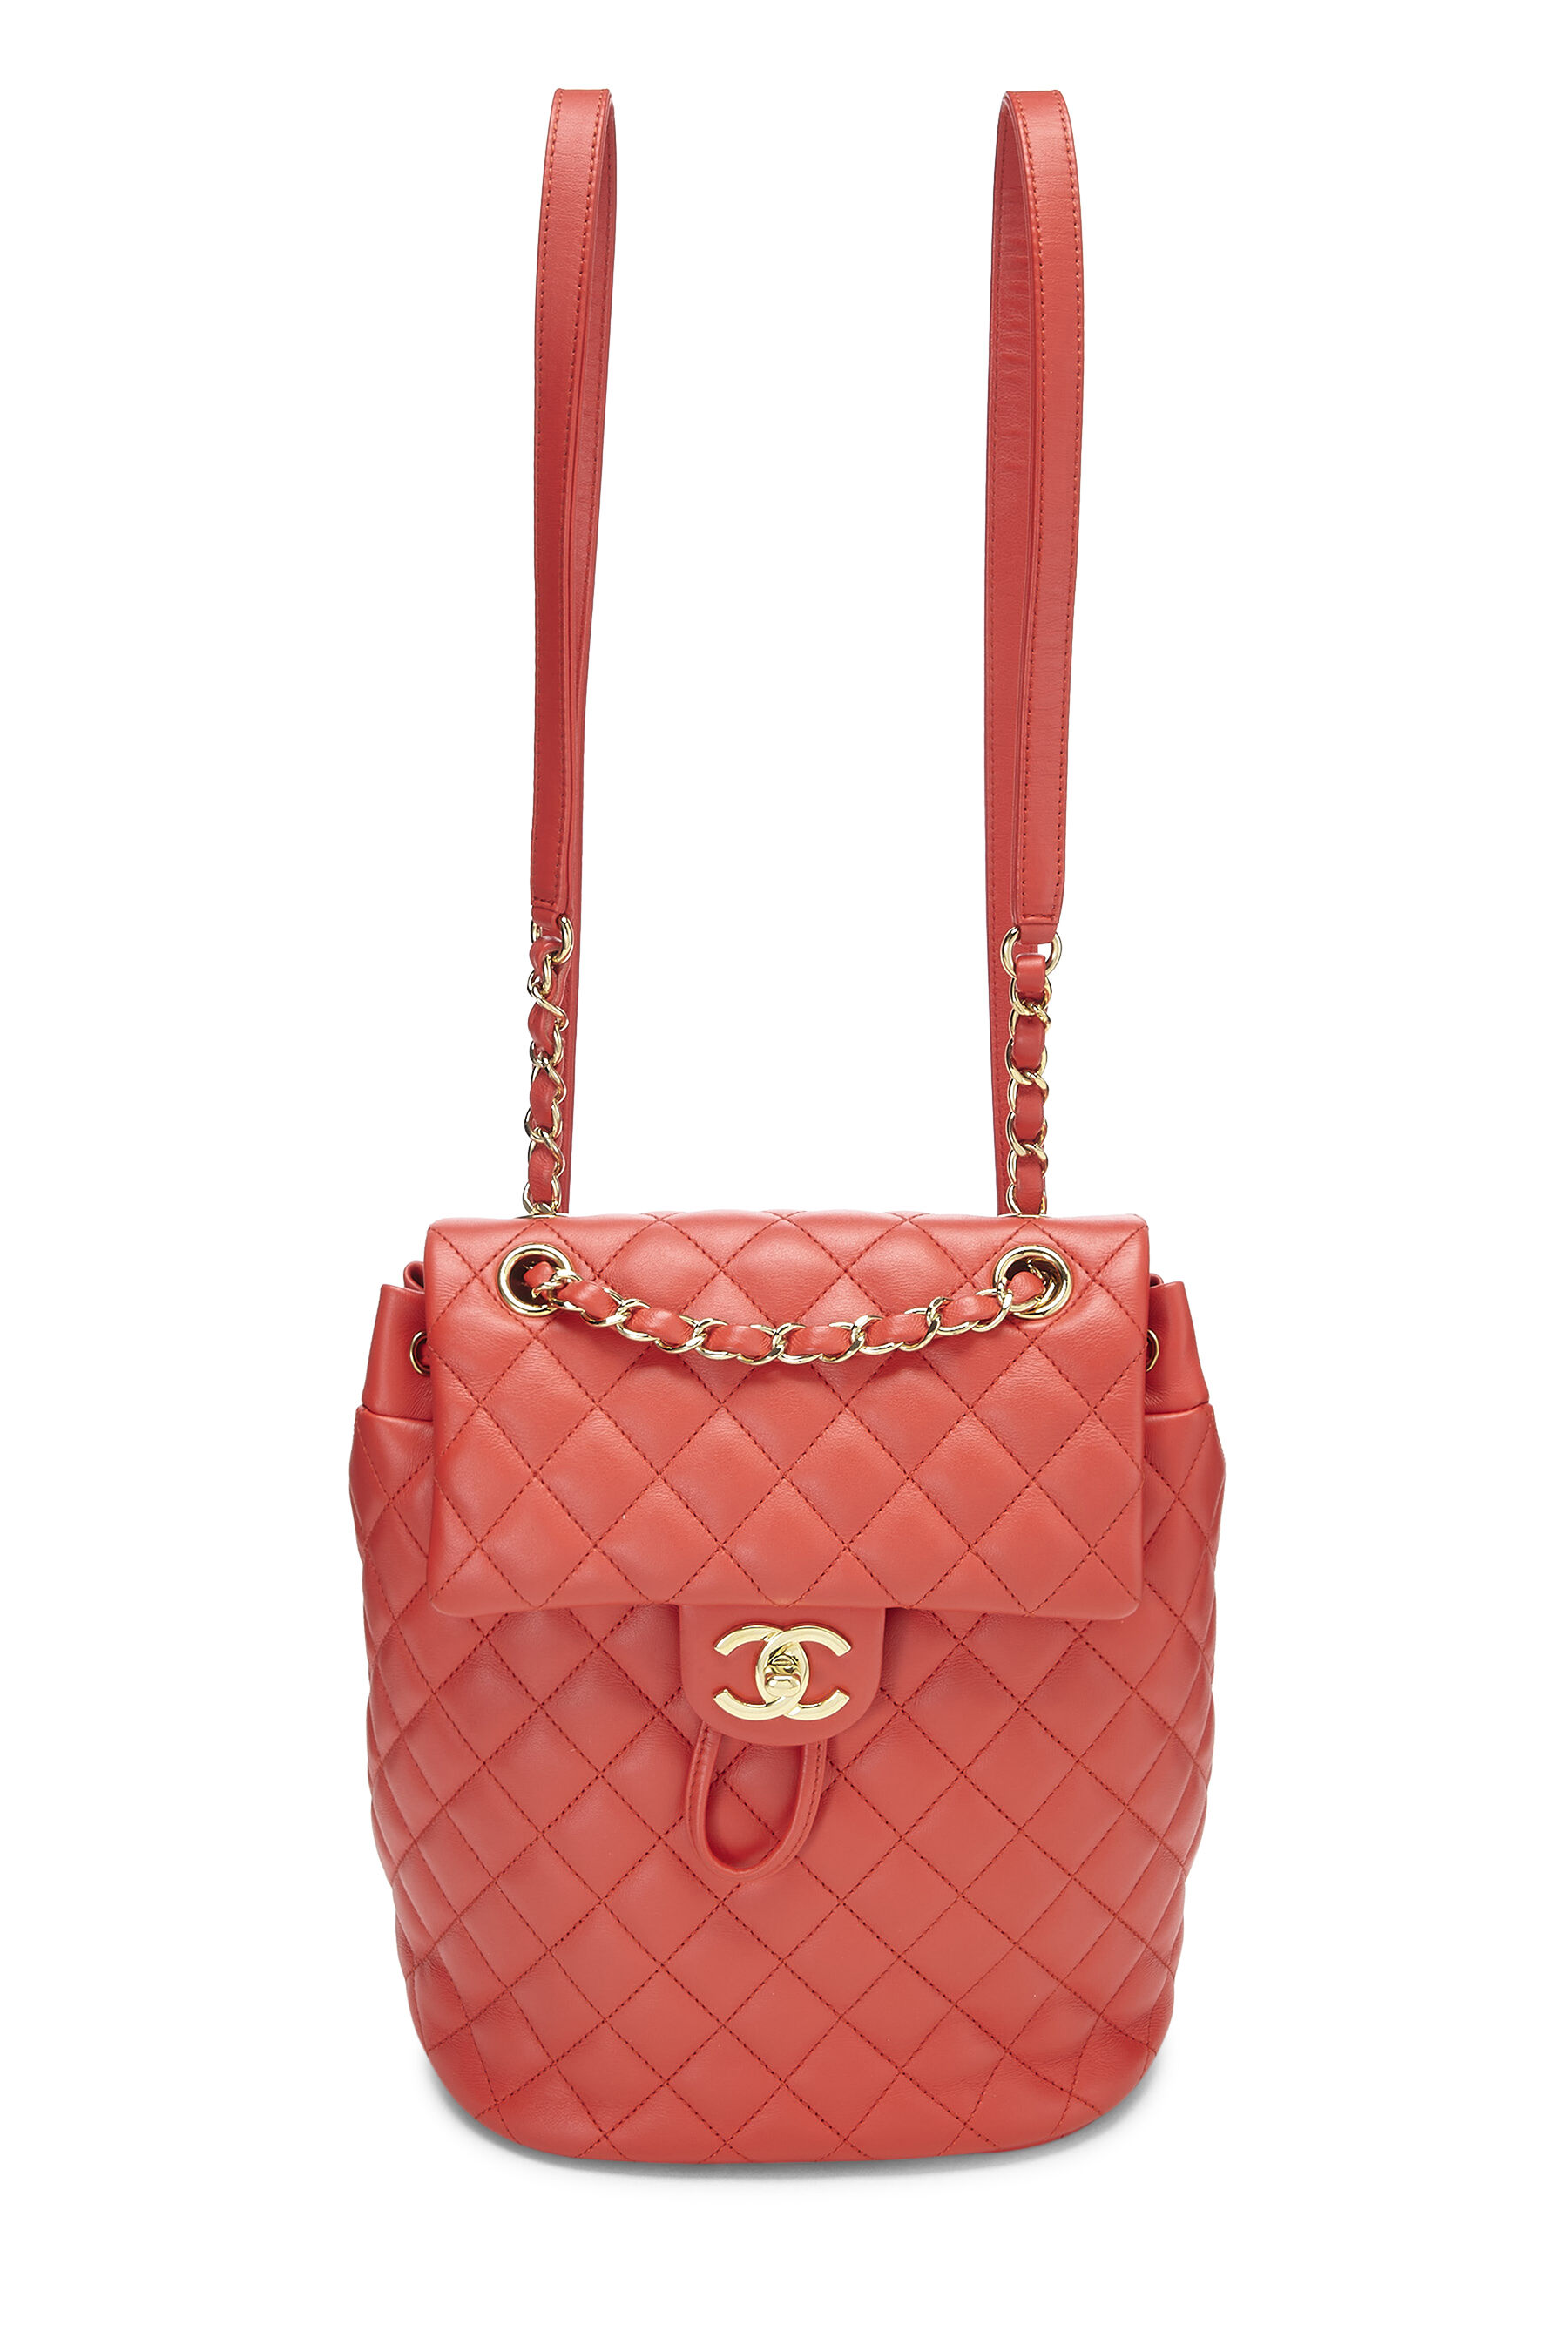 Chanel - Red Quilted Lambskin Urban Spirit Backpack Small